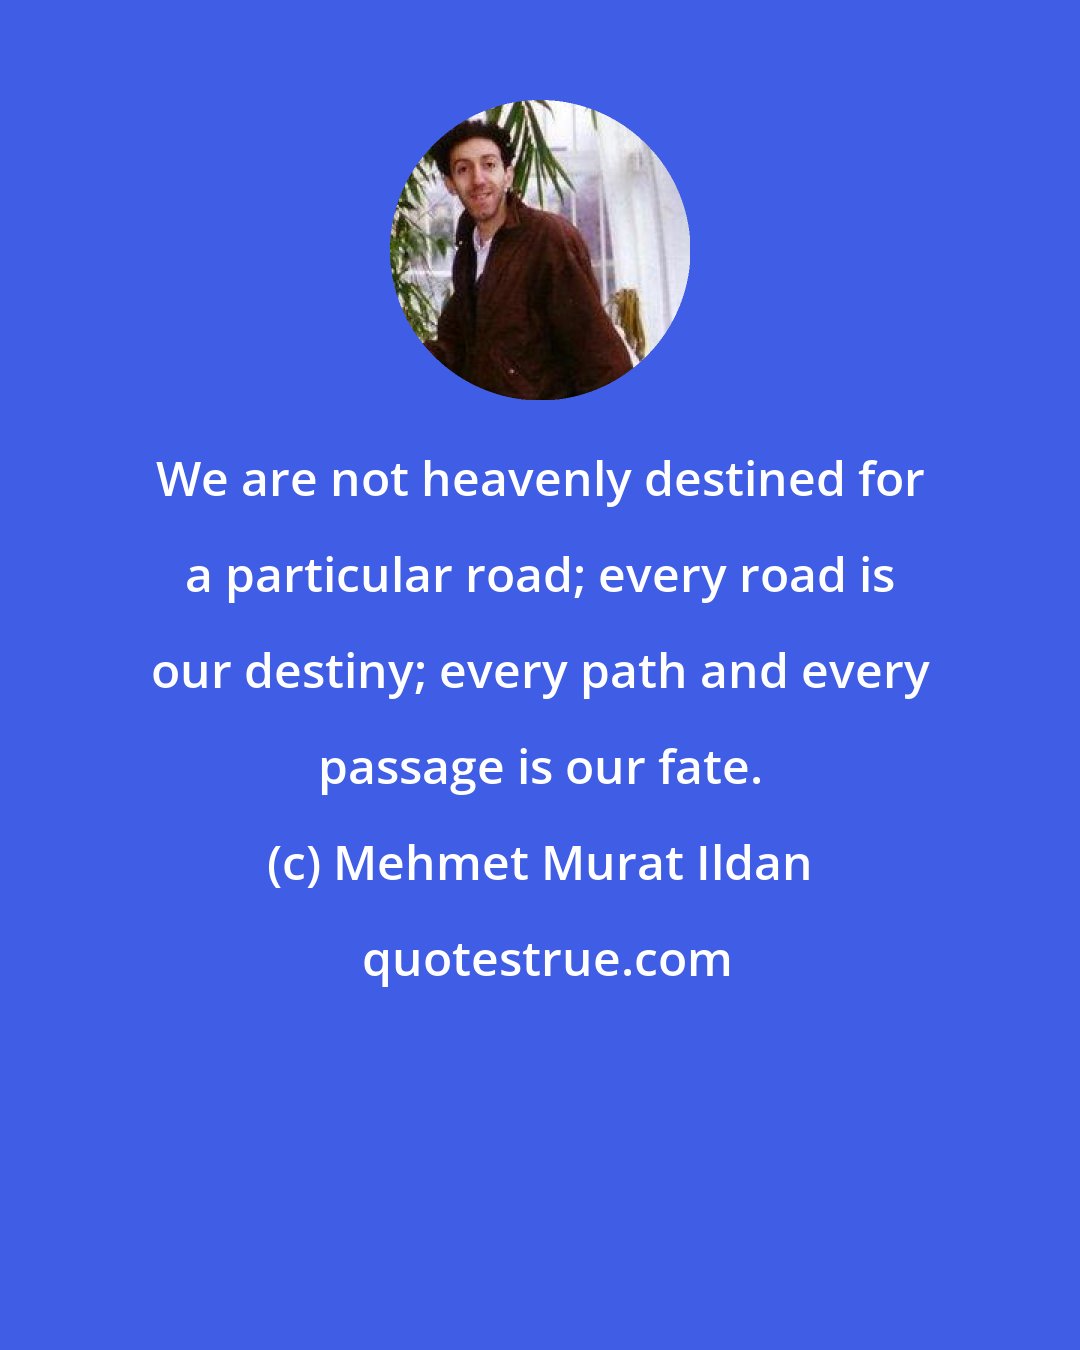 Mehmet Murat Ildan: We are not heavenly destined for a particular road; every road is our destiny; every path and every passage is our fate.